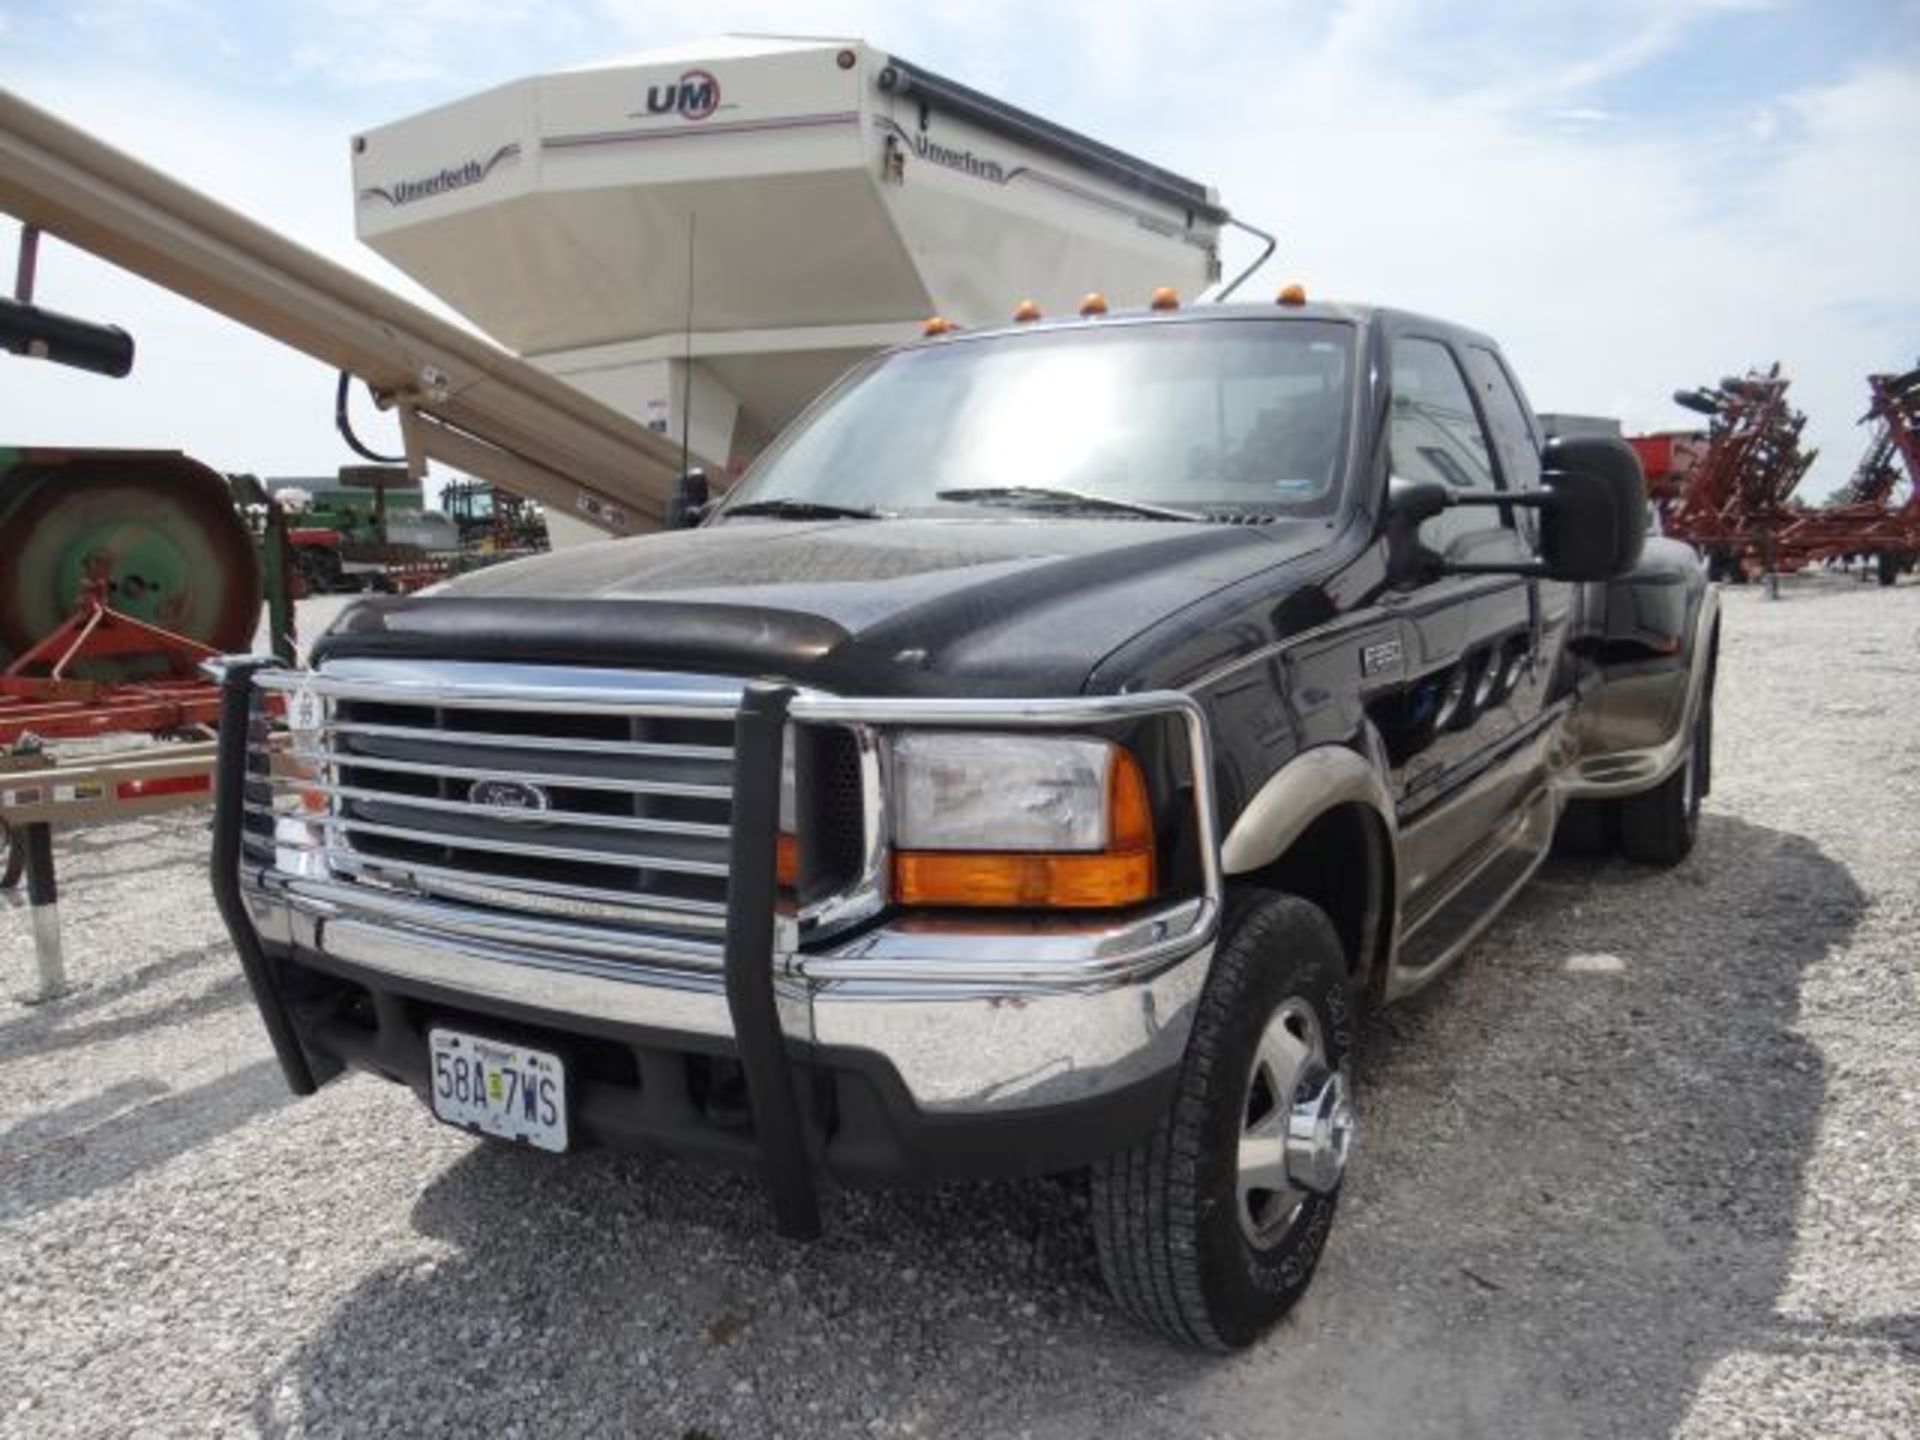 2000 Ford F350 Truck 51,134 miles, 7.3L V8 Diesel, Lariat Pkg, 5th Wheel Hitch, Dually, Ext Cab, - Image 2 of 4